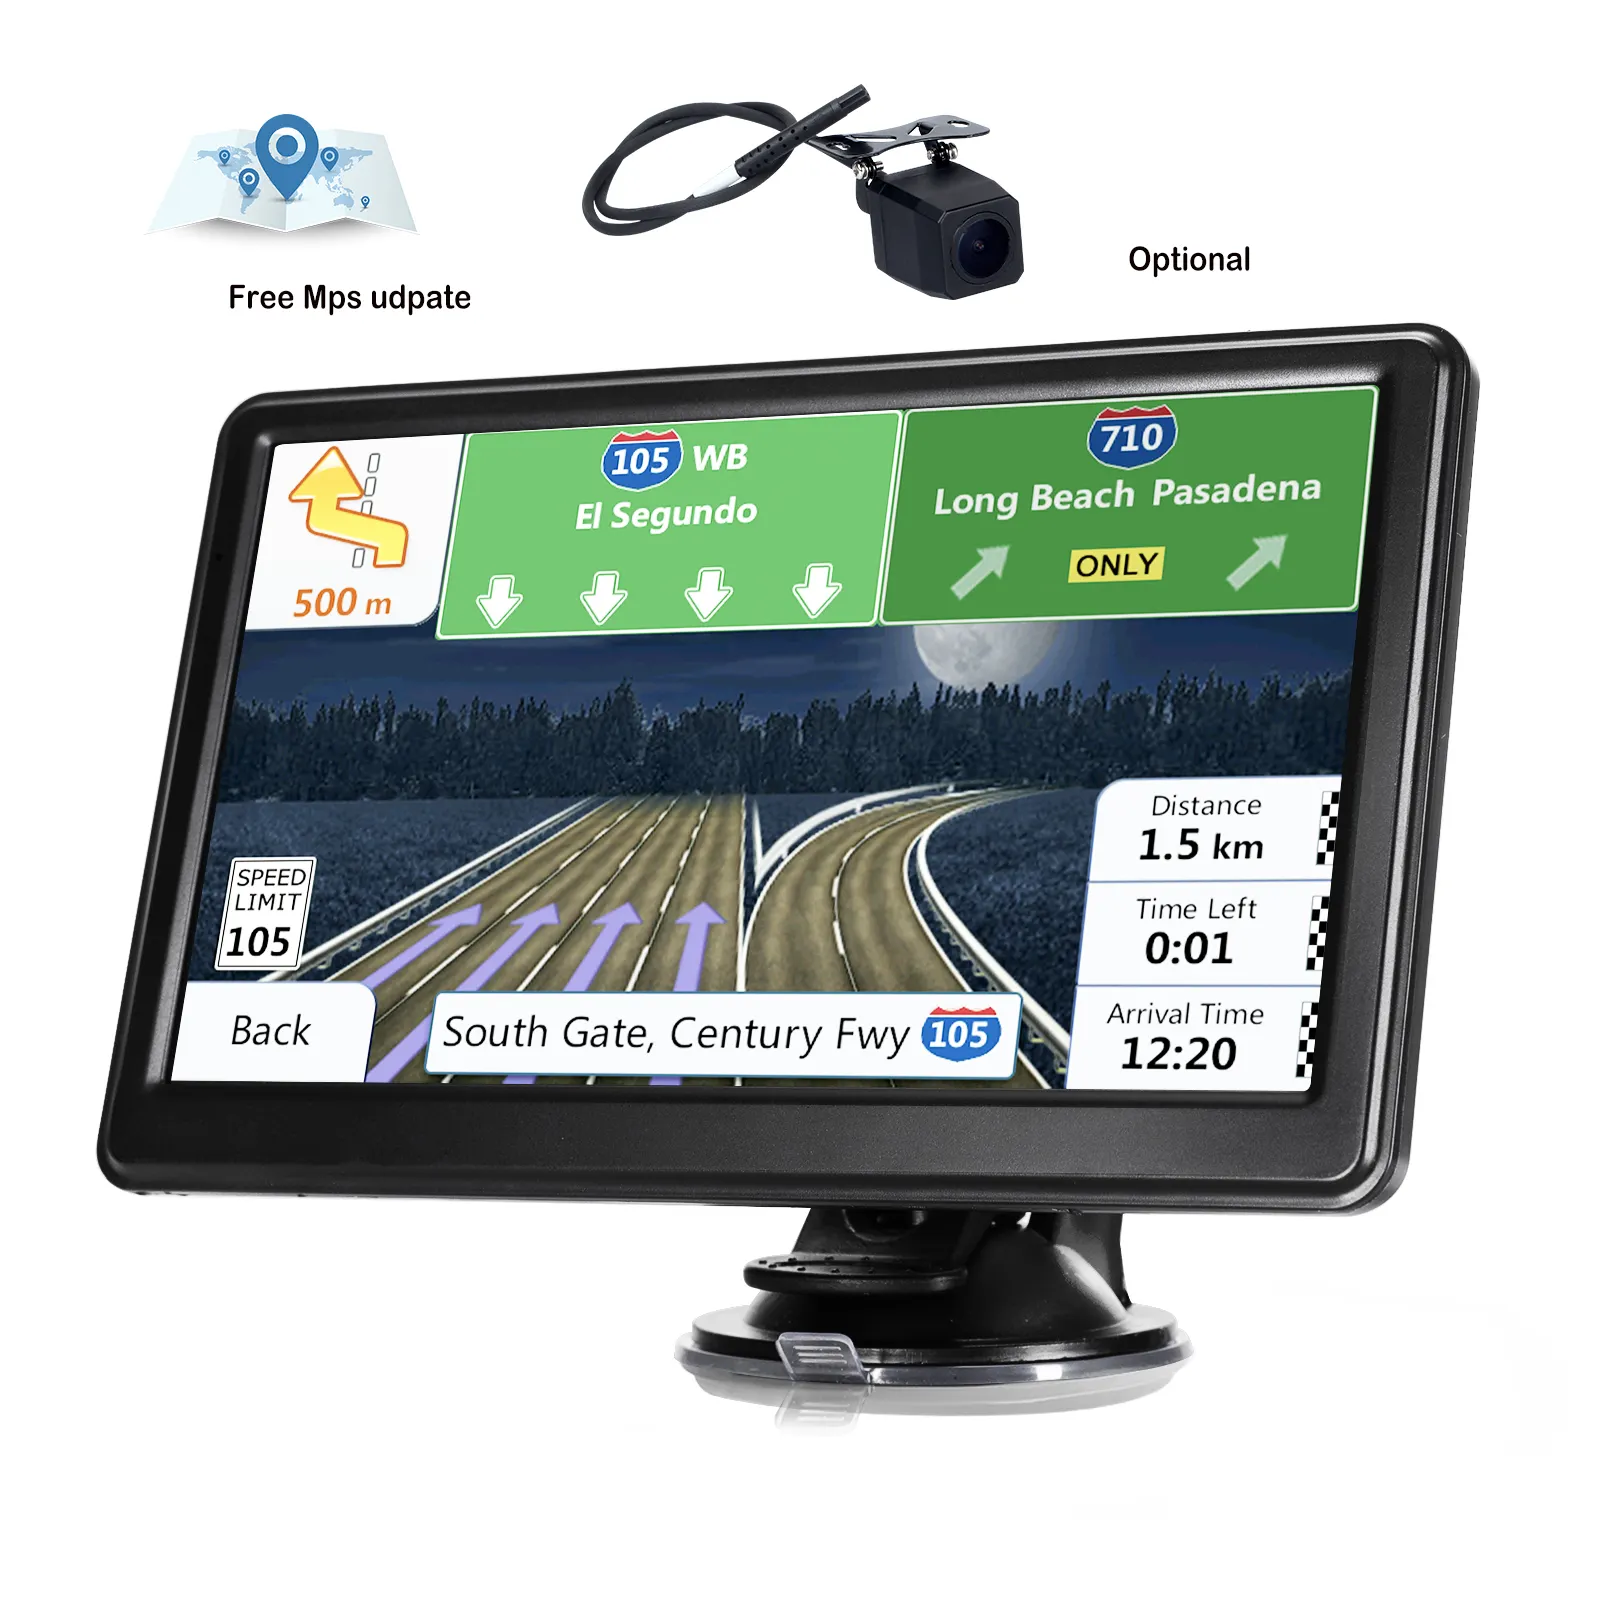 New Universal 7 Inch HD Capacitive Touch Screen Portable Vehicle Navigator Car Tracking Gps Navigation System With Free Map